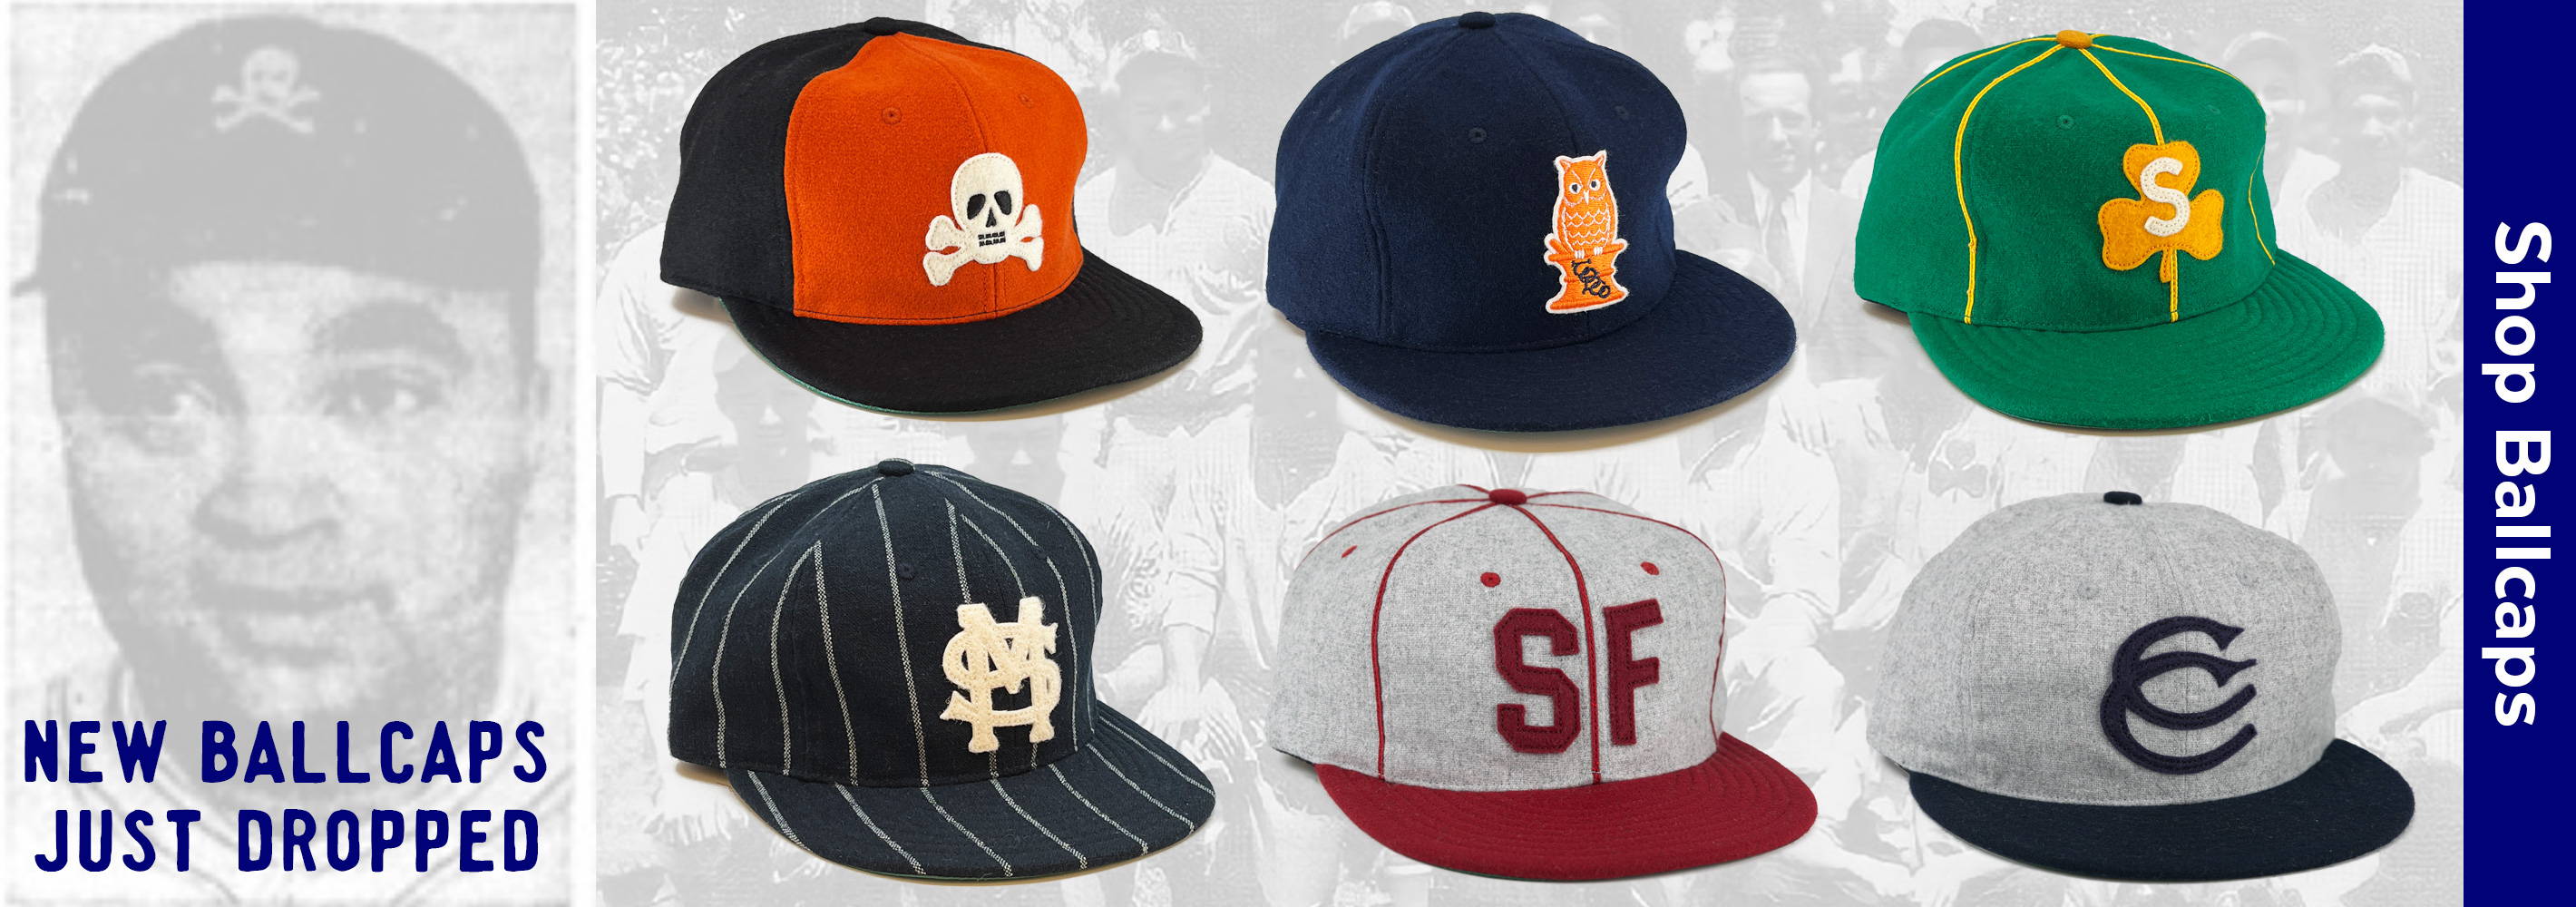 Six hats from a new collection are displayed in two rows. From left to right they are: (top row) a black and orange hat with a skull and crossbones, a navy blue hat with an orange owl patch, a green hat with gold trim and a gold felt clover patch with a white felt 'S' in the center; (bottom row) a navy blue hat with white pinstripes and a cream felt interlocked 'SM', a gray hat with a  burgundy visor, burgundy trim and burgundy felt 'SF', a gray hat with a navy blue visor and navy blue felt interlocking 'CC'. [Vintage Baseball] [Sportswear] [Wool Hats] [Semi-pro Baseball] [Sandlot Baseball] [San Francisco] [California]